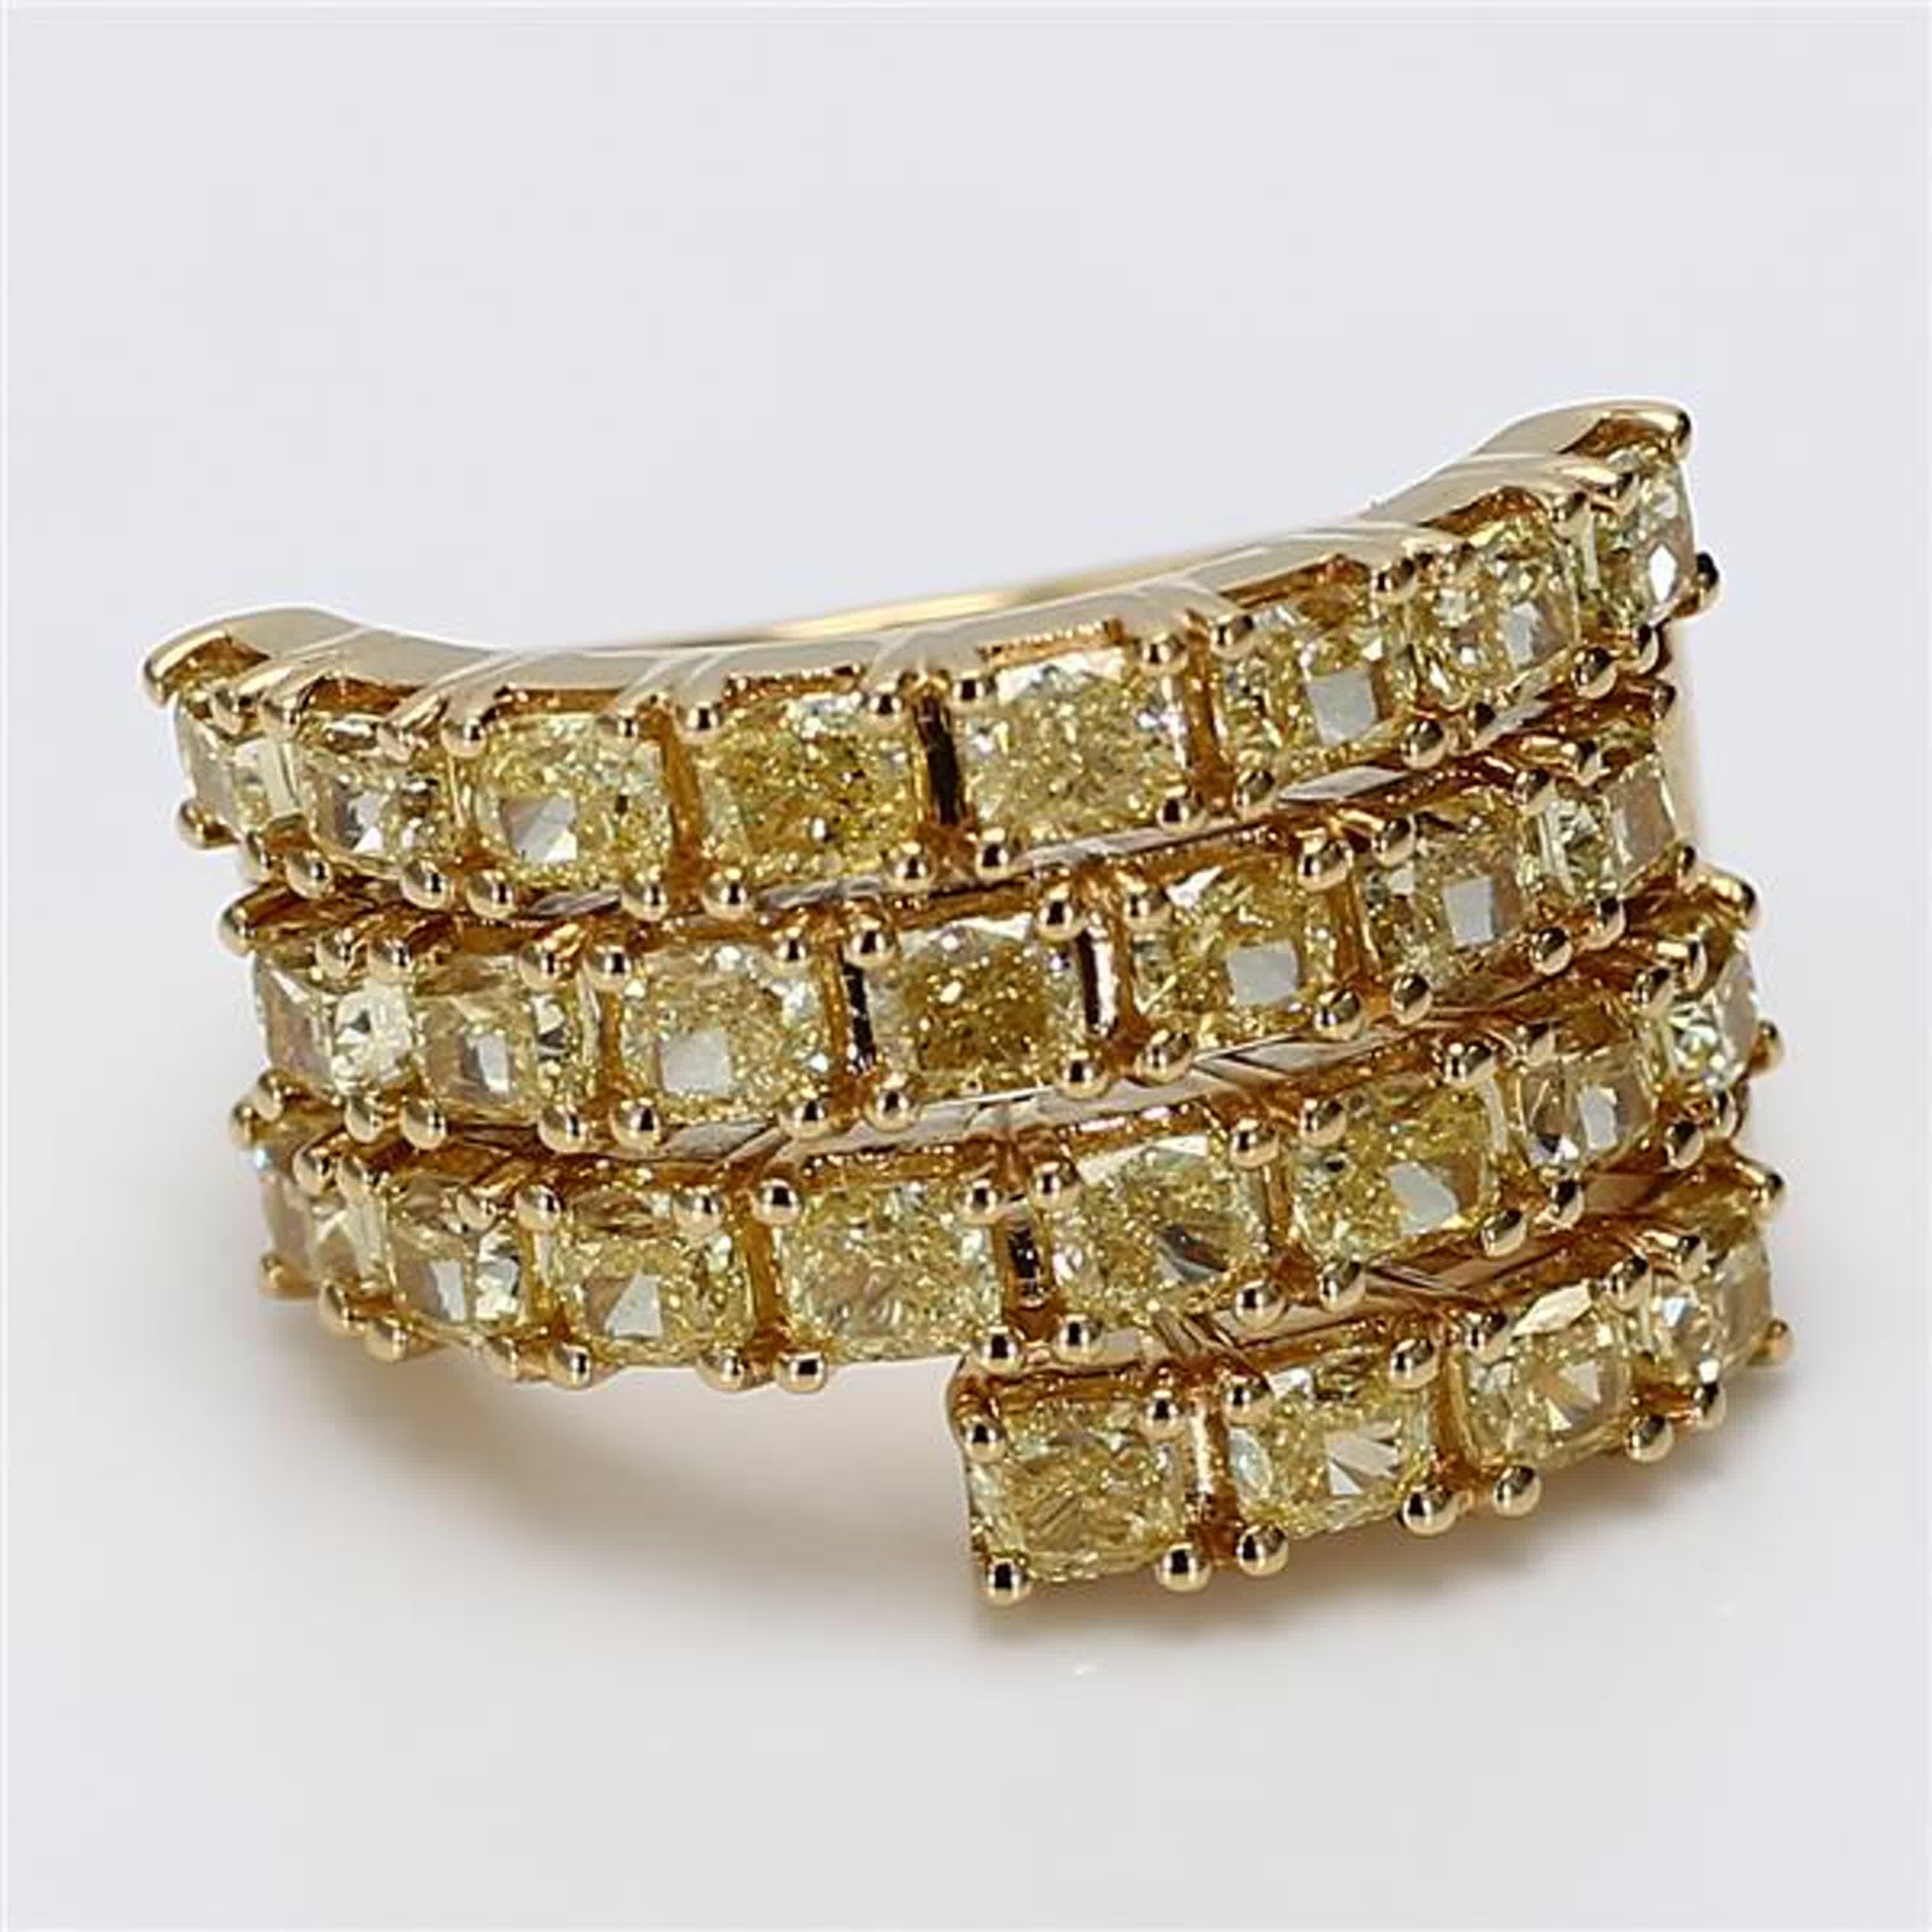 RareGemWorld's classic diamond band. Mounted in a beautiful 18K Yellow and White Gold setting with natural cushion cut yellow diamonds. This band is guaranteed to impress and enhance your personal collection!

Total Weight: 3.95cts

Length x Width: